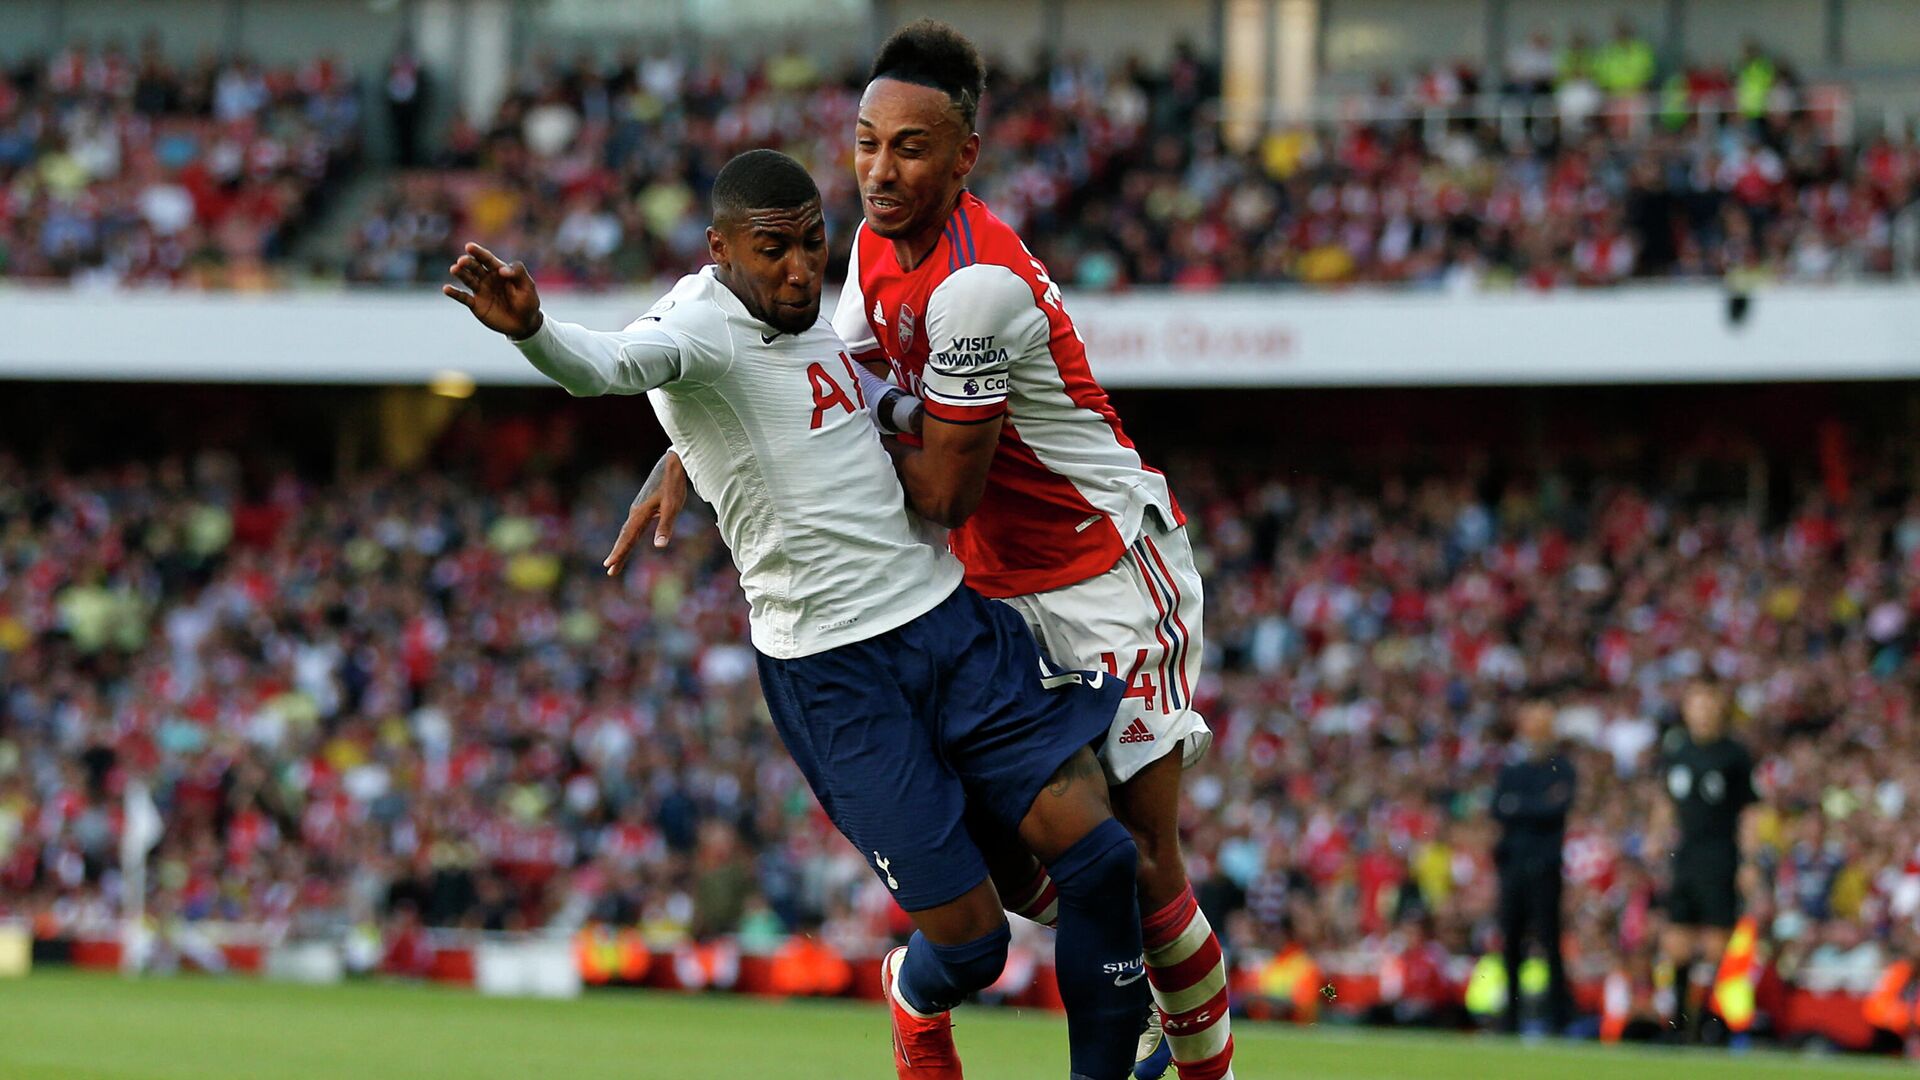 Tottenham Hotspur's Brazilian defender Emerson Royal (L) vies with Arsenal's Gabonese striker Pierre-Emerick Aubameyang (R) during the English Premier League football match between Arsenal and Tottenham Hotspur at the Emirates Stadium in London on September 26, 2021. (Photo by Ian KINGTON / IKIMAGES / AFP) / RESTRICTED TO EDITORIAL USE. No use with unauthorized audio, video, data, fixture lists, club/league logos or 'live' services. Online in-match use limited to 45 images, no video emulation. No use in betting, games or single club/league/player publications. - РИА Новости, 1920, 14.01.2022